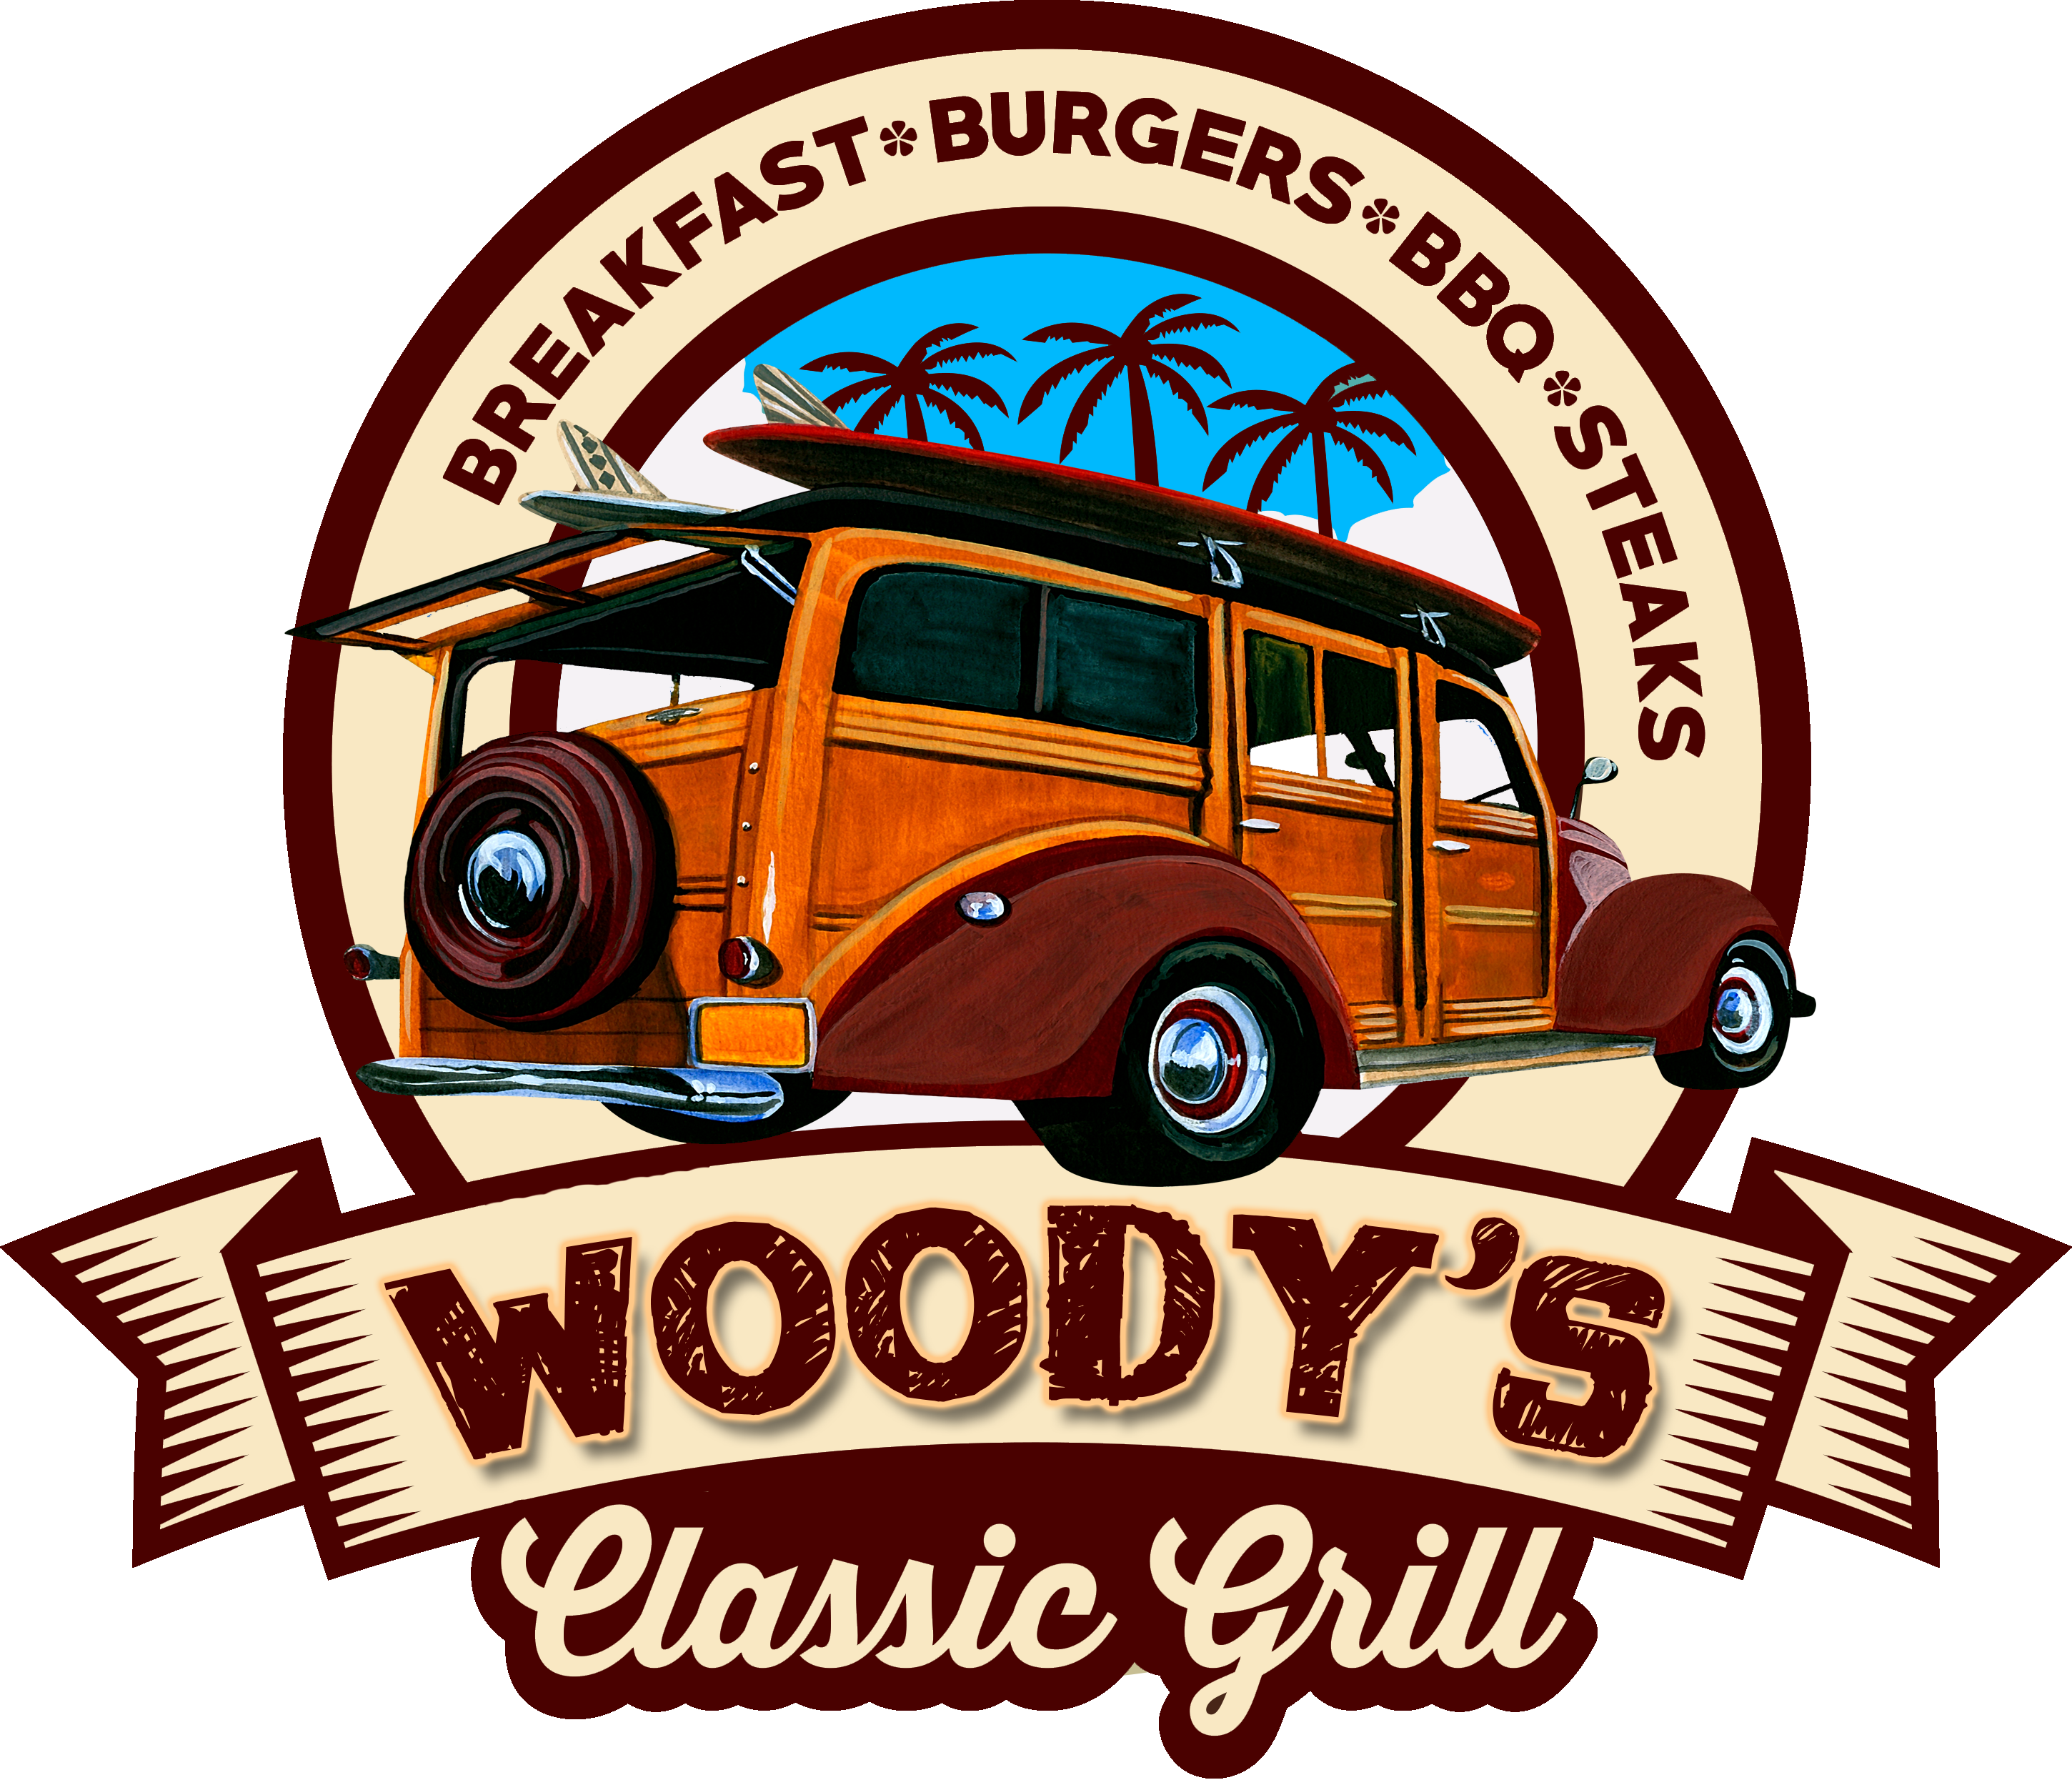 Woody's Classic Grill